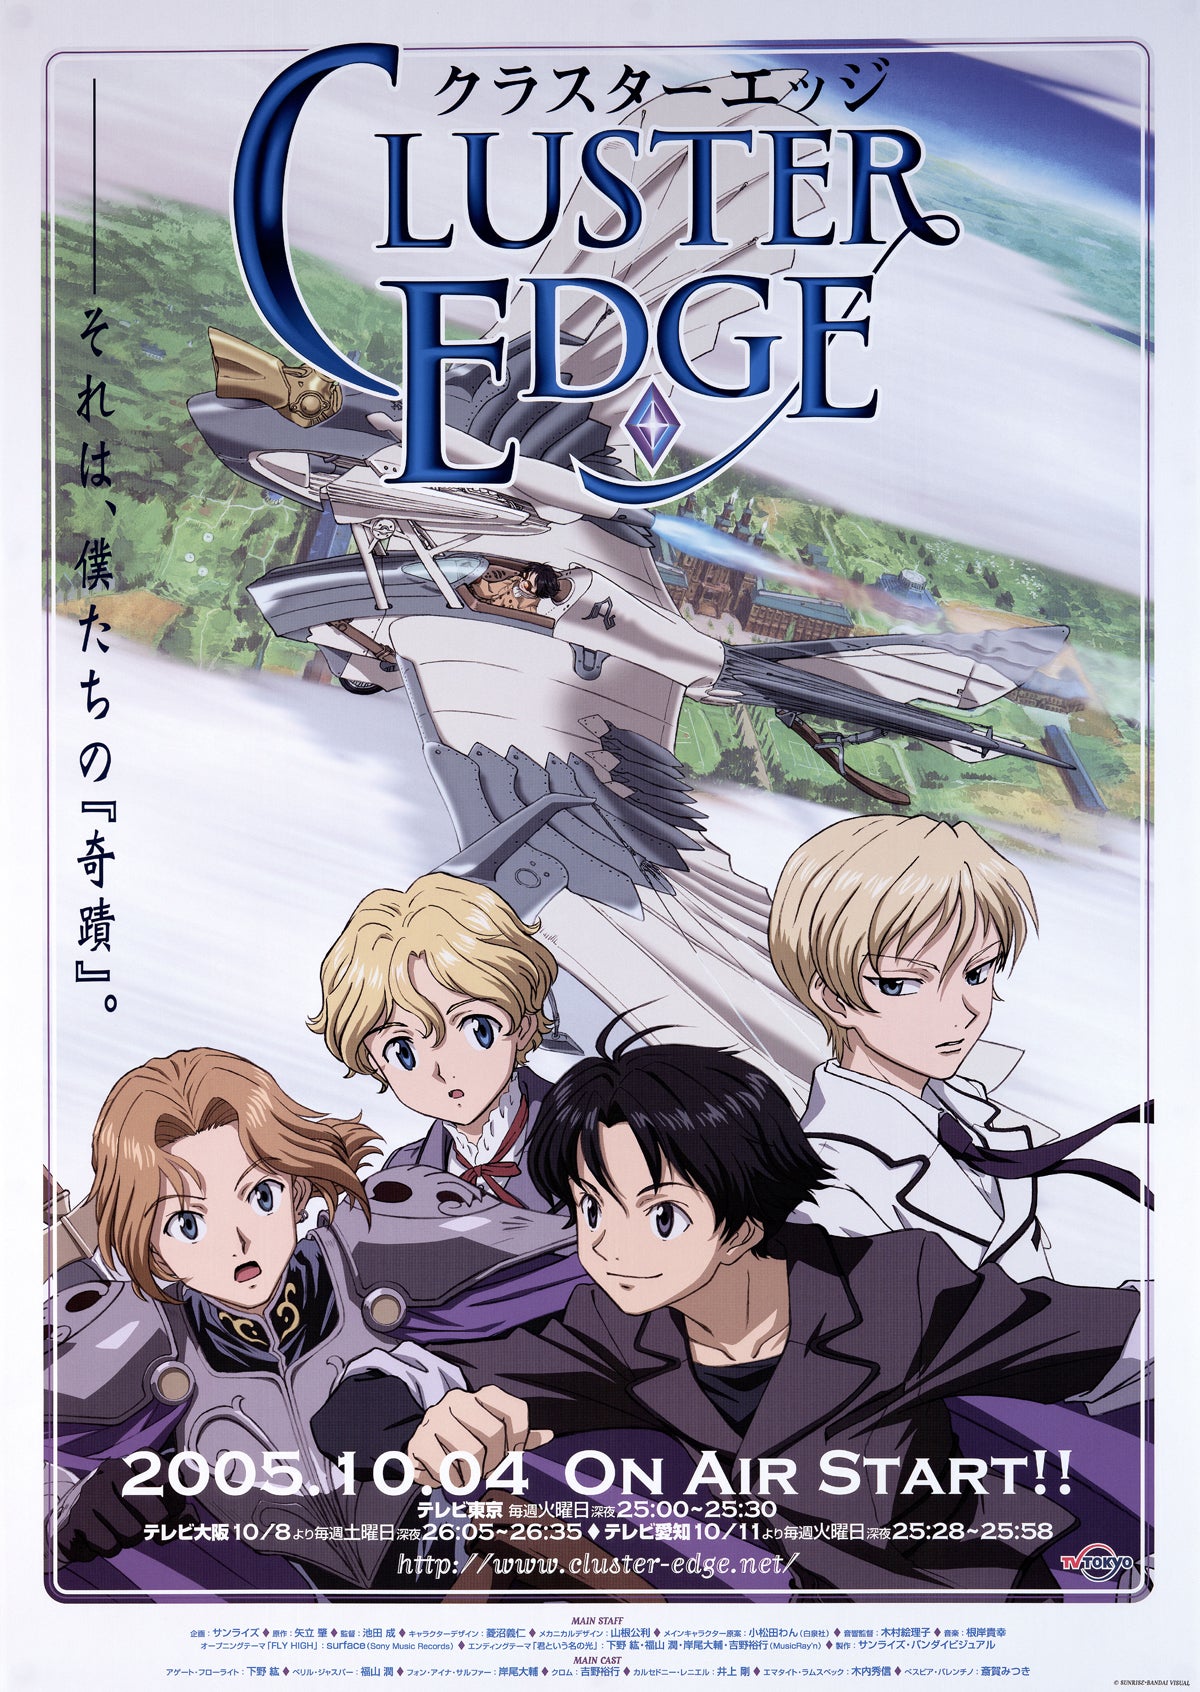 Cluster Edge Part 1 u0026 2 (DVD IMPORT) ~Previously Viewed~ – Oxford Comics u0026  Games